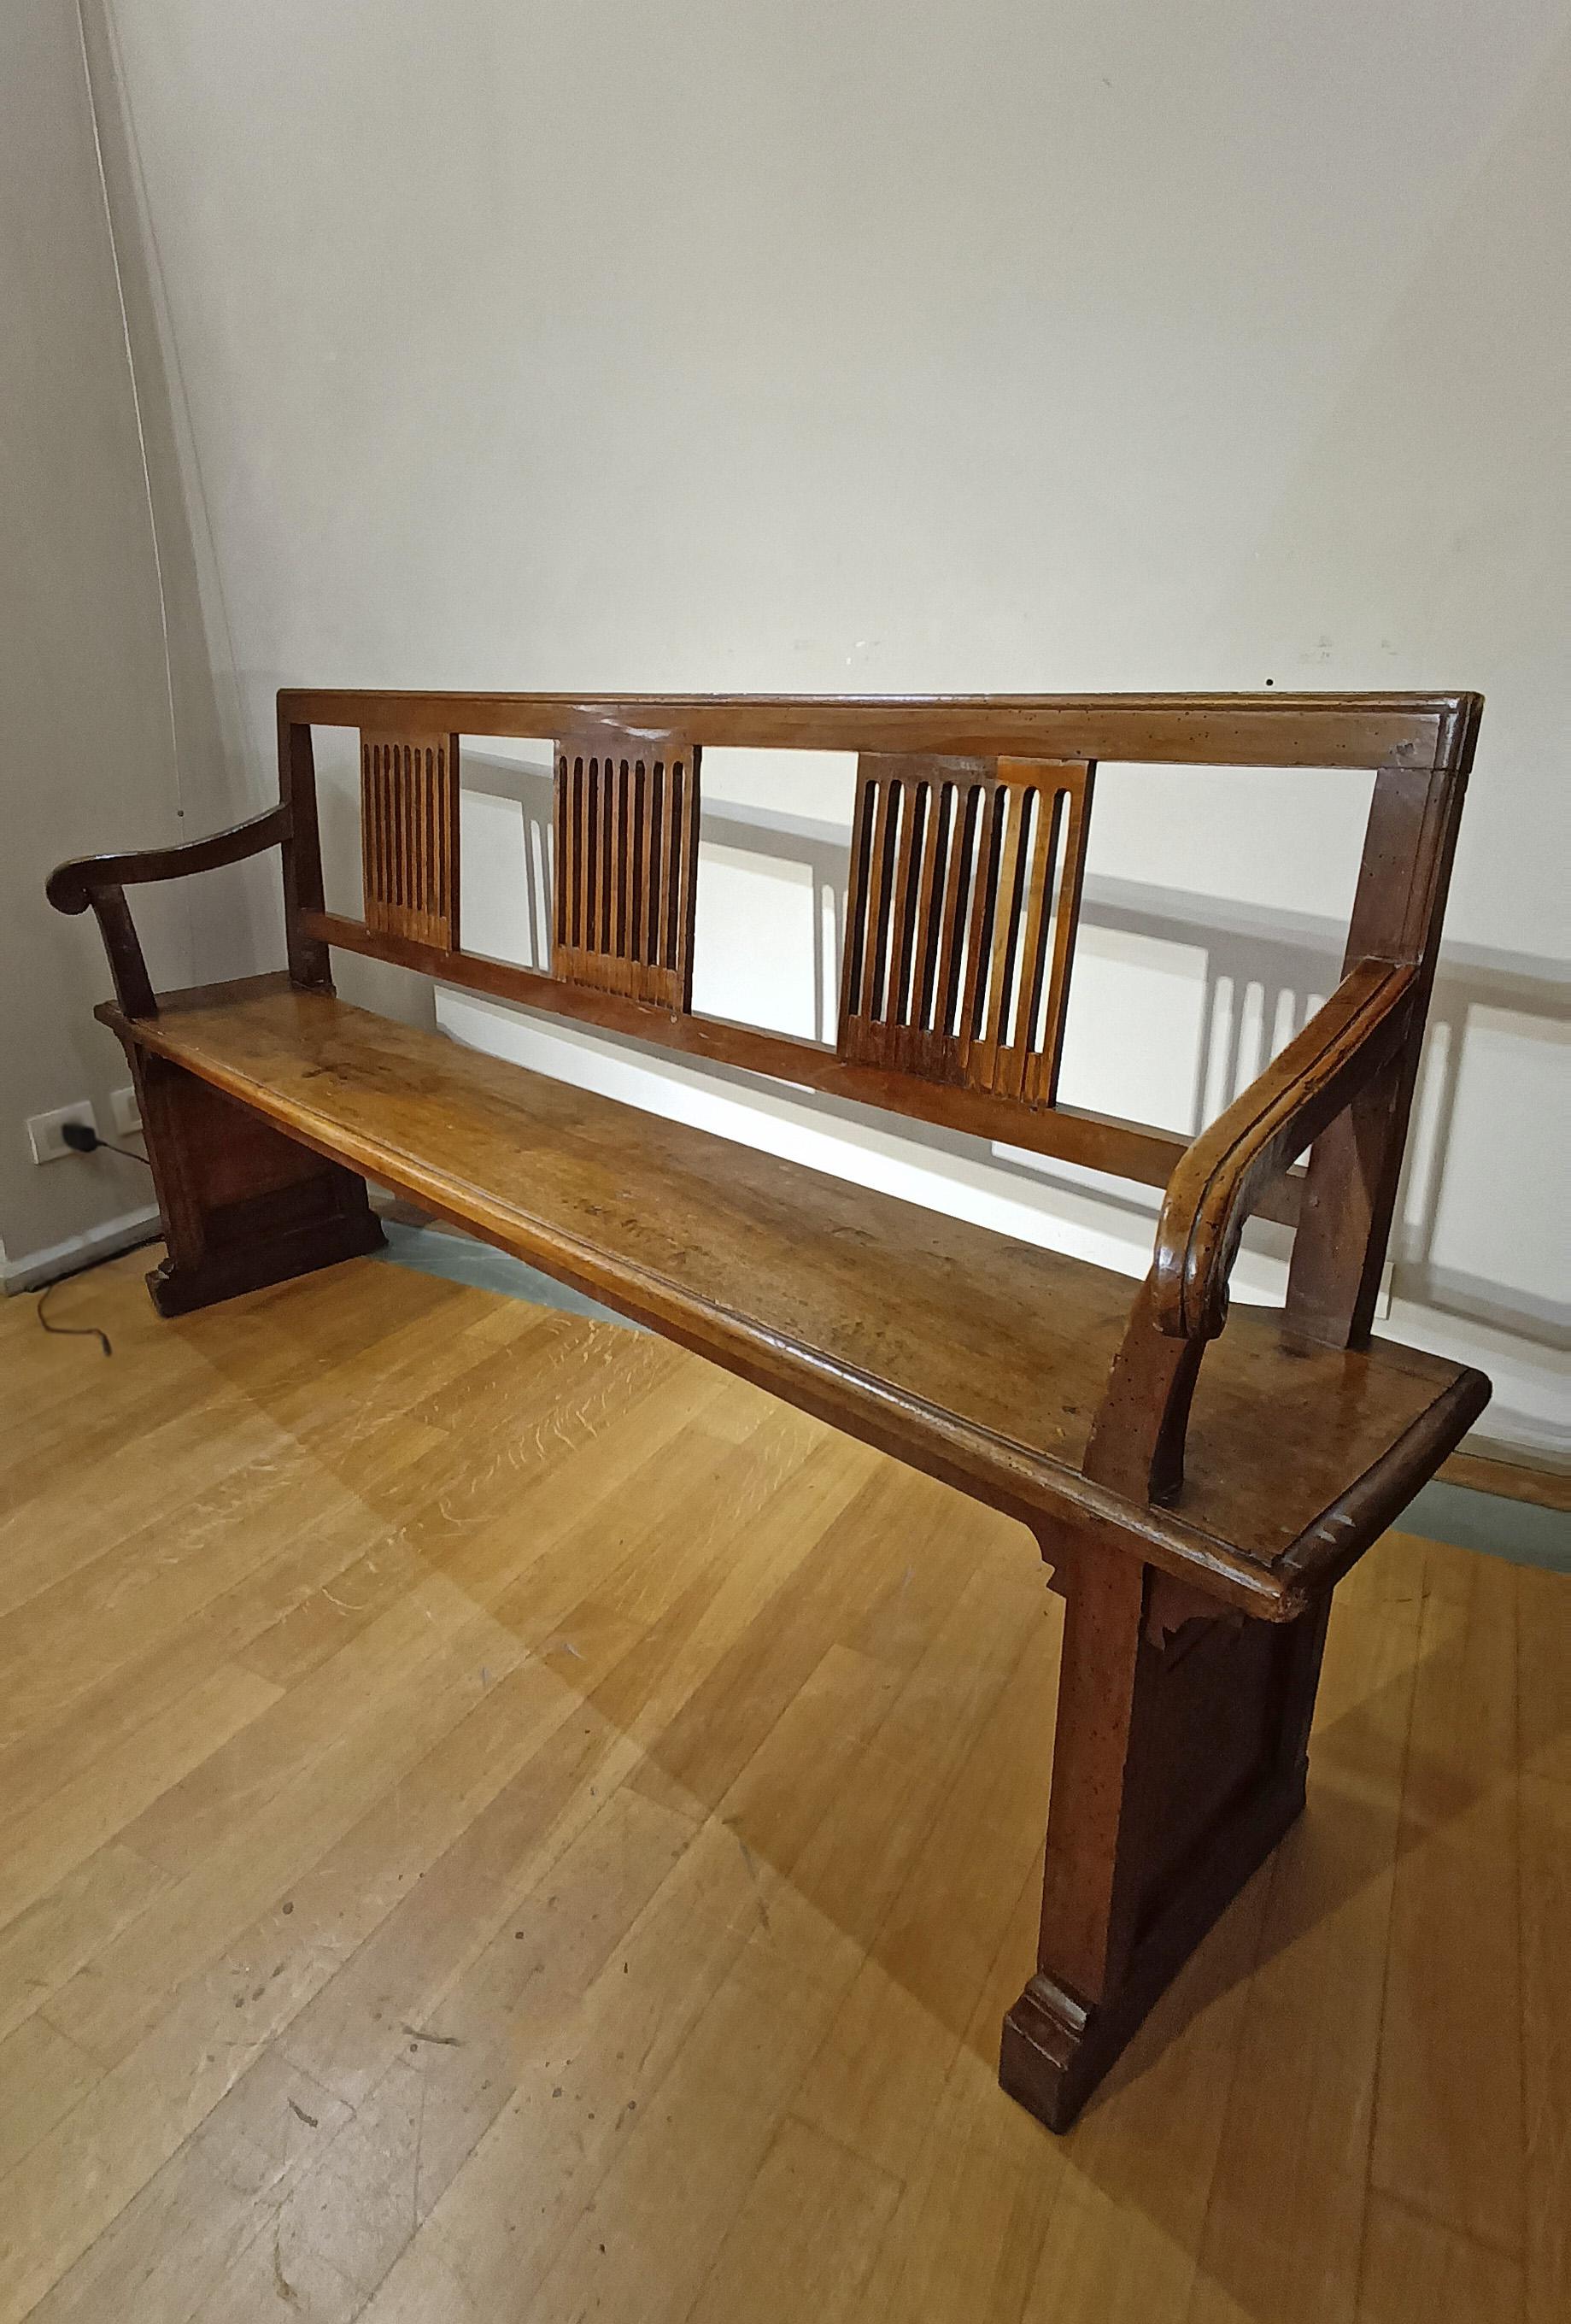 Splendid entrance bench in solid walnut, characterized by a carved backrest with linear decorations on three parts. The shoulder rest was also made from a single piece of fine walnut wood. The bench has two elegant armrests on the sides, slightly